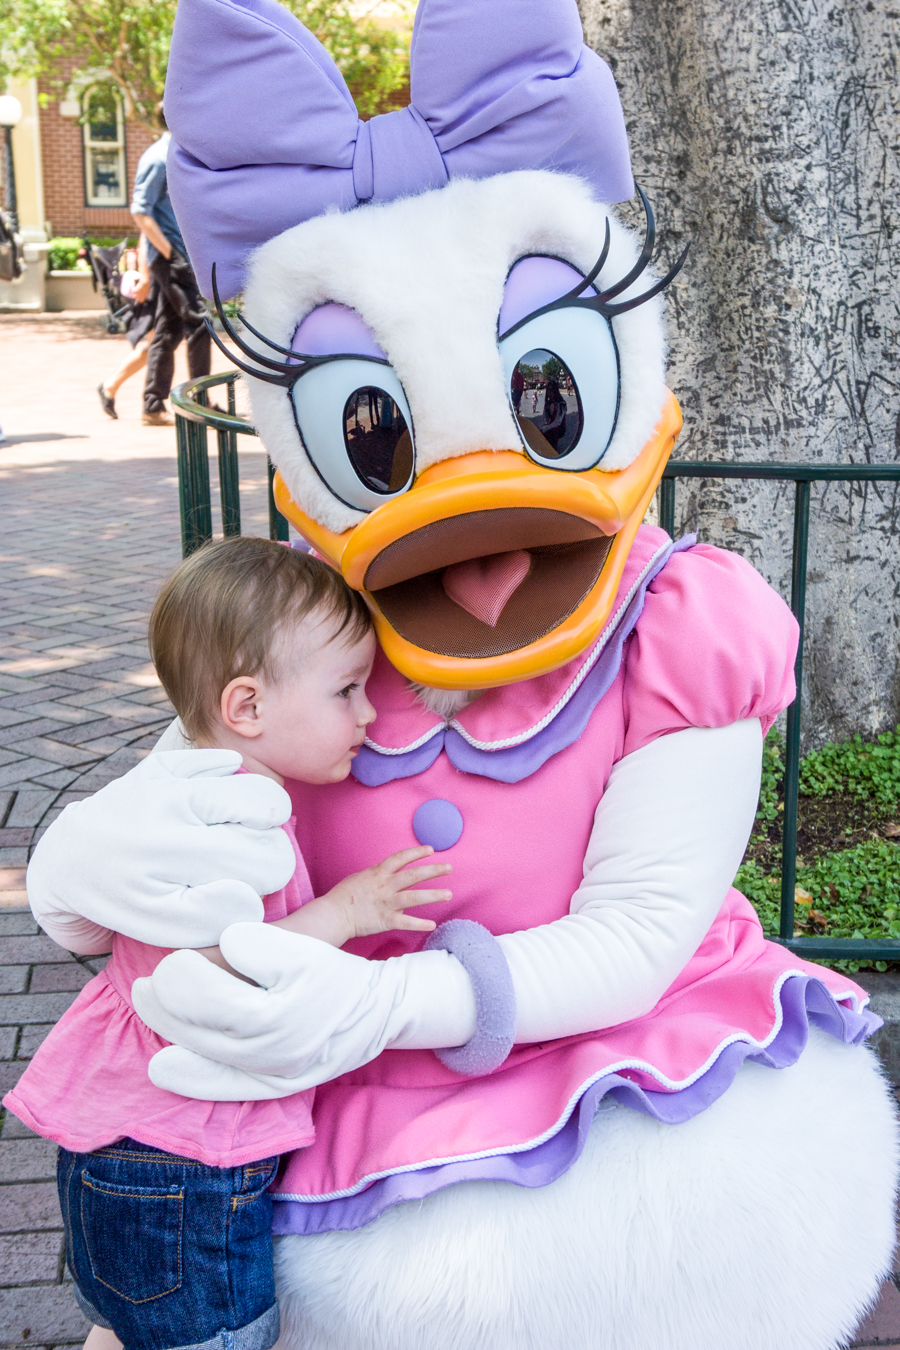 Going to Disneyland with a toddler. Meeting characters. Daisy Duck.